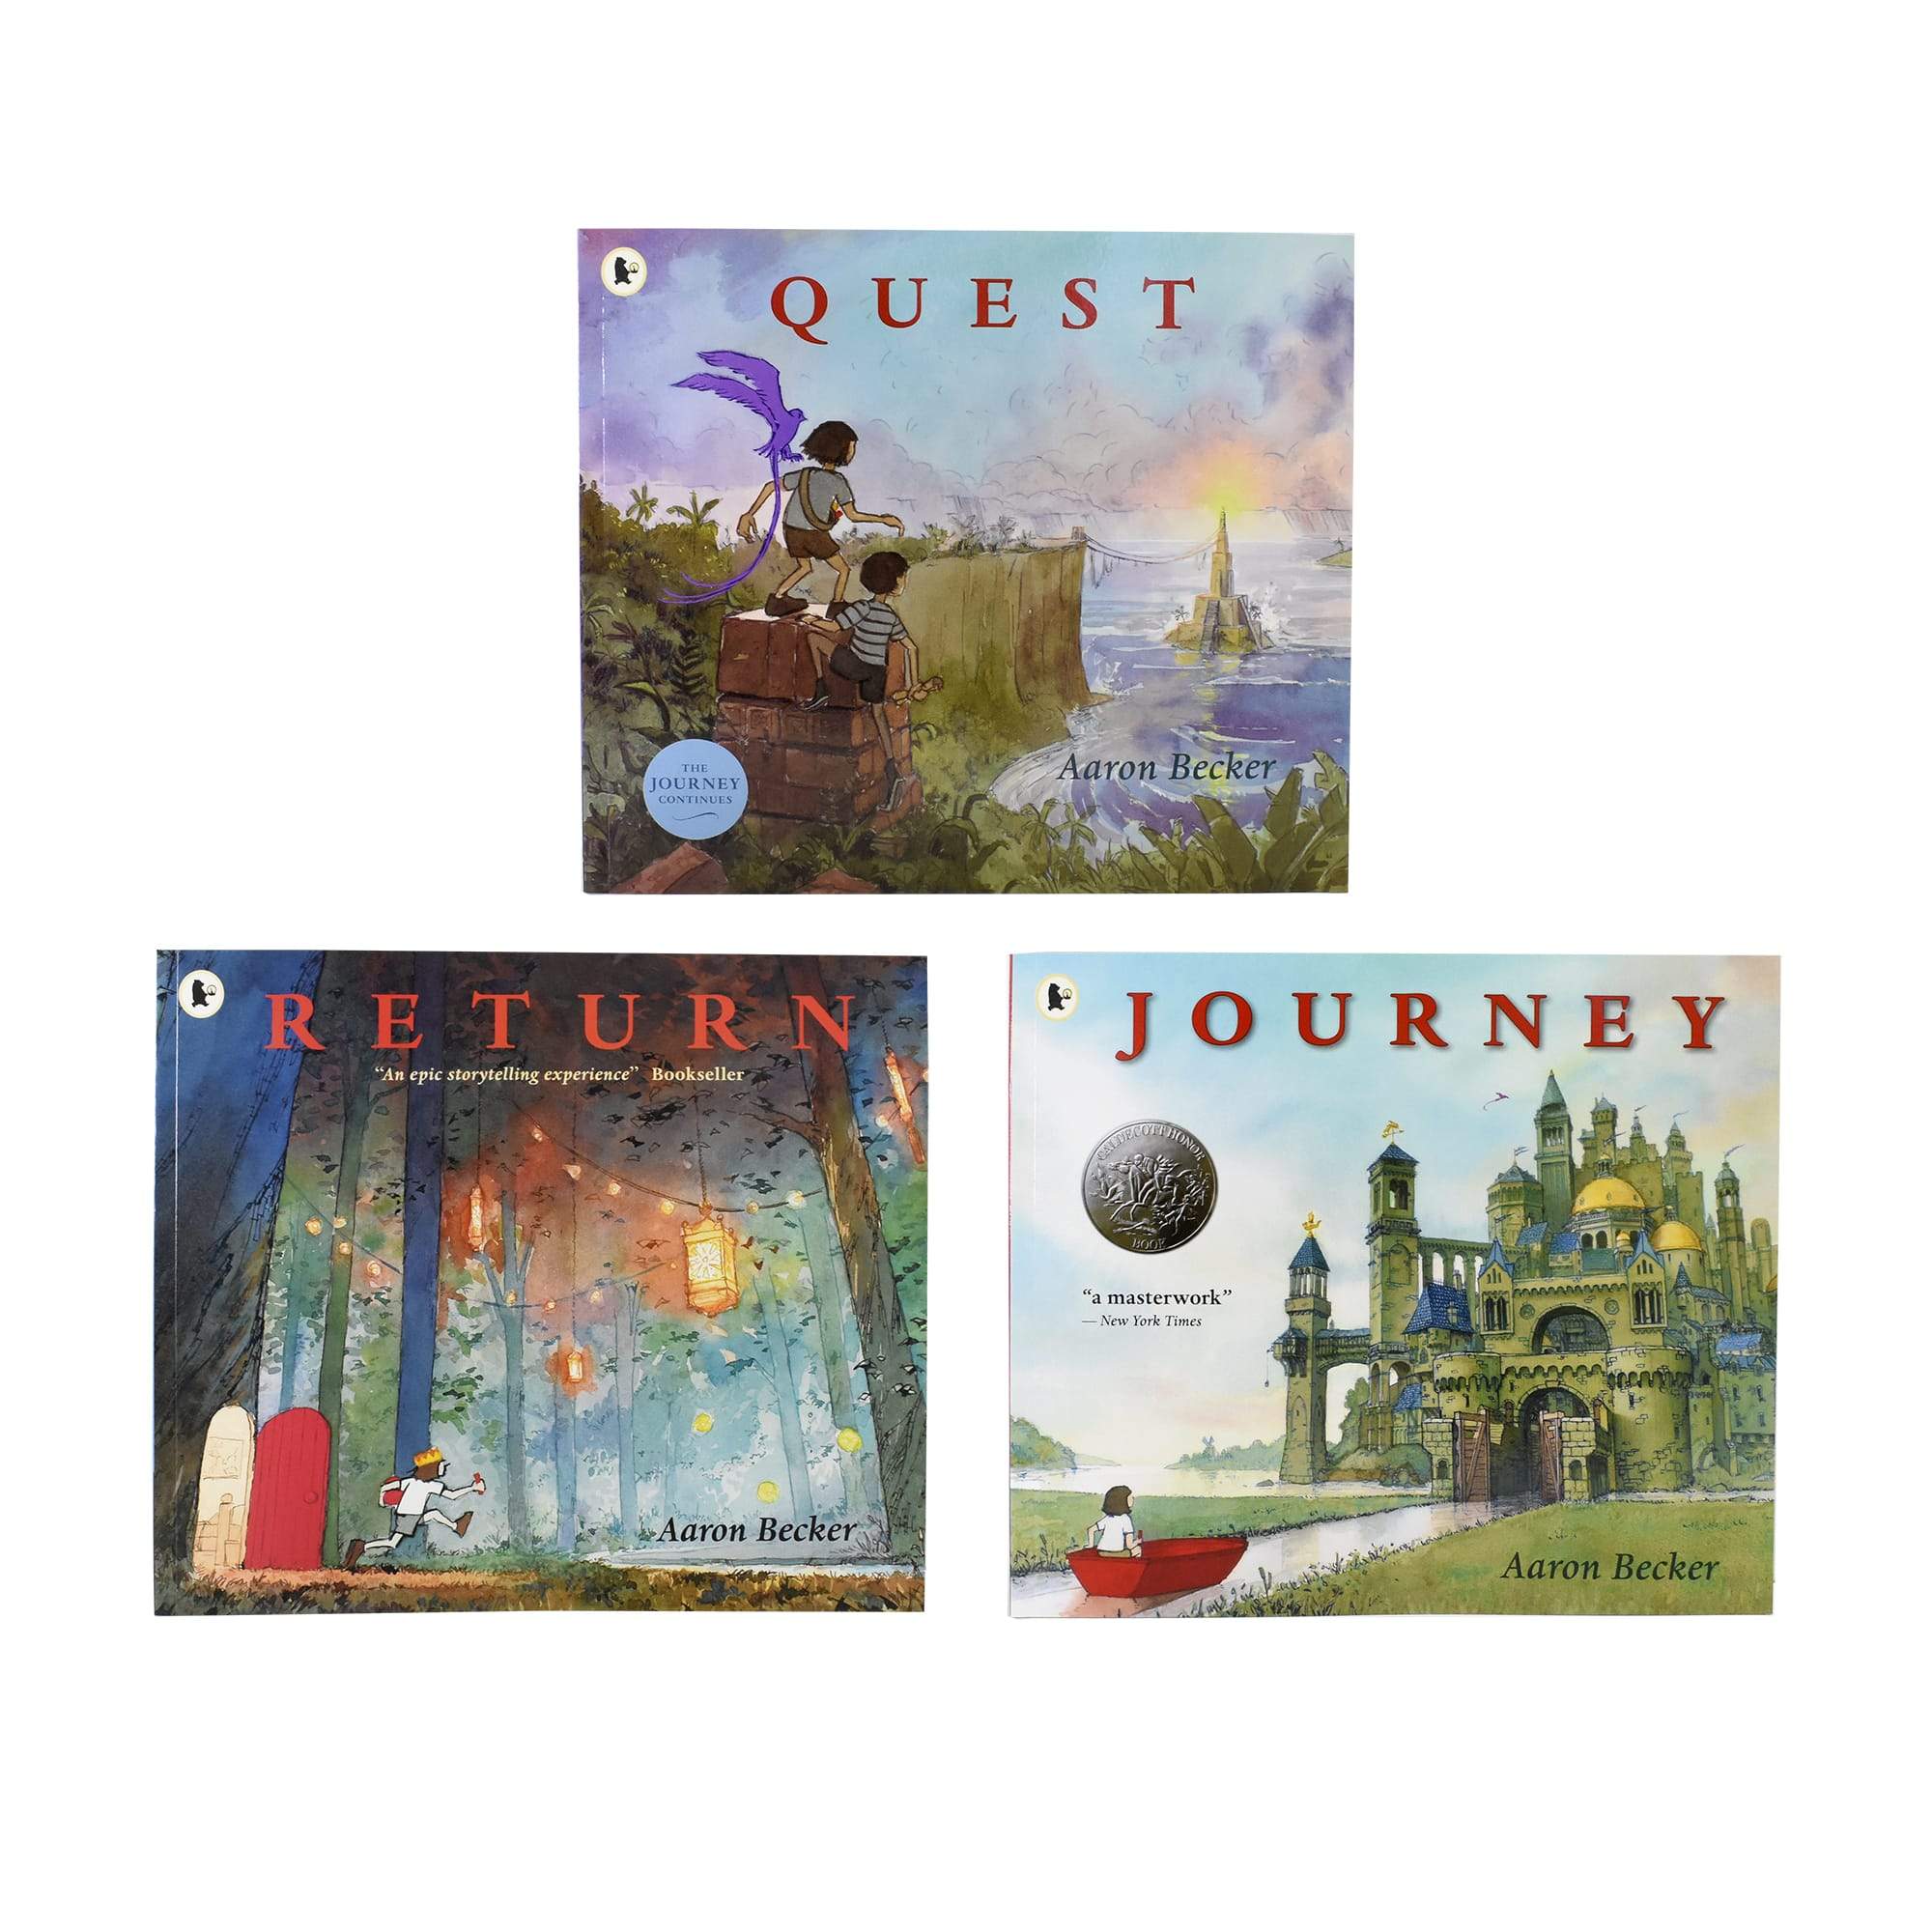 Journey trilogy 3 Books Children Collection Paperback Set By Aaron Becker - St Stephens Books